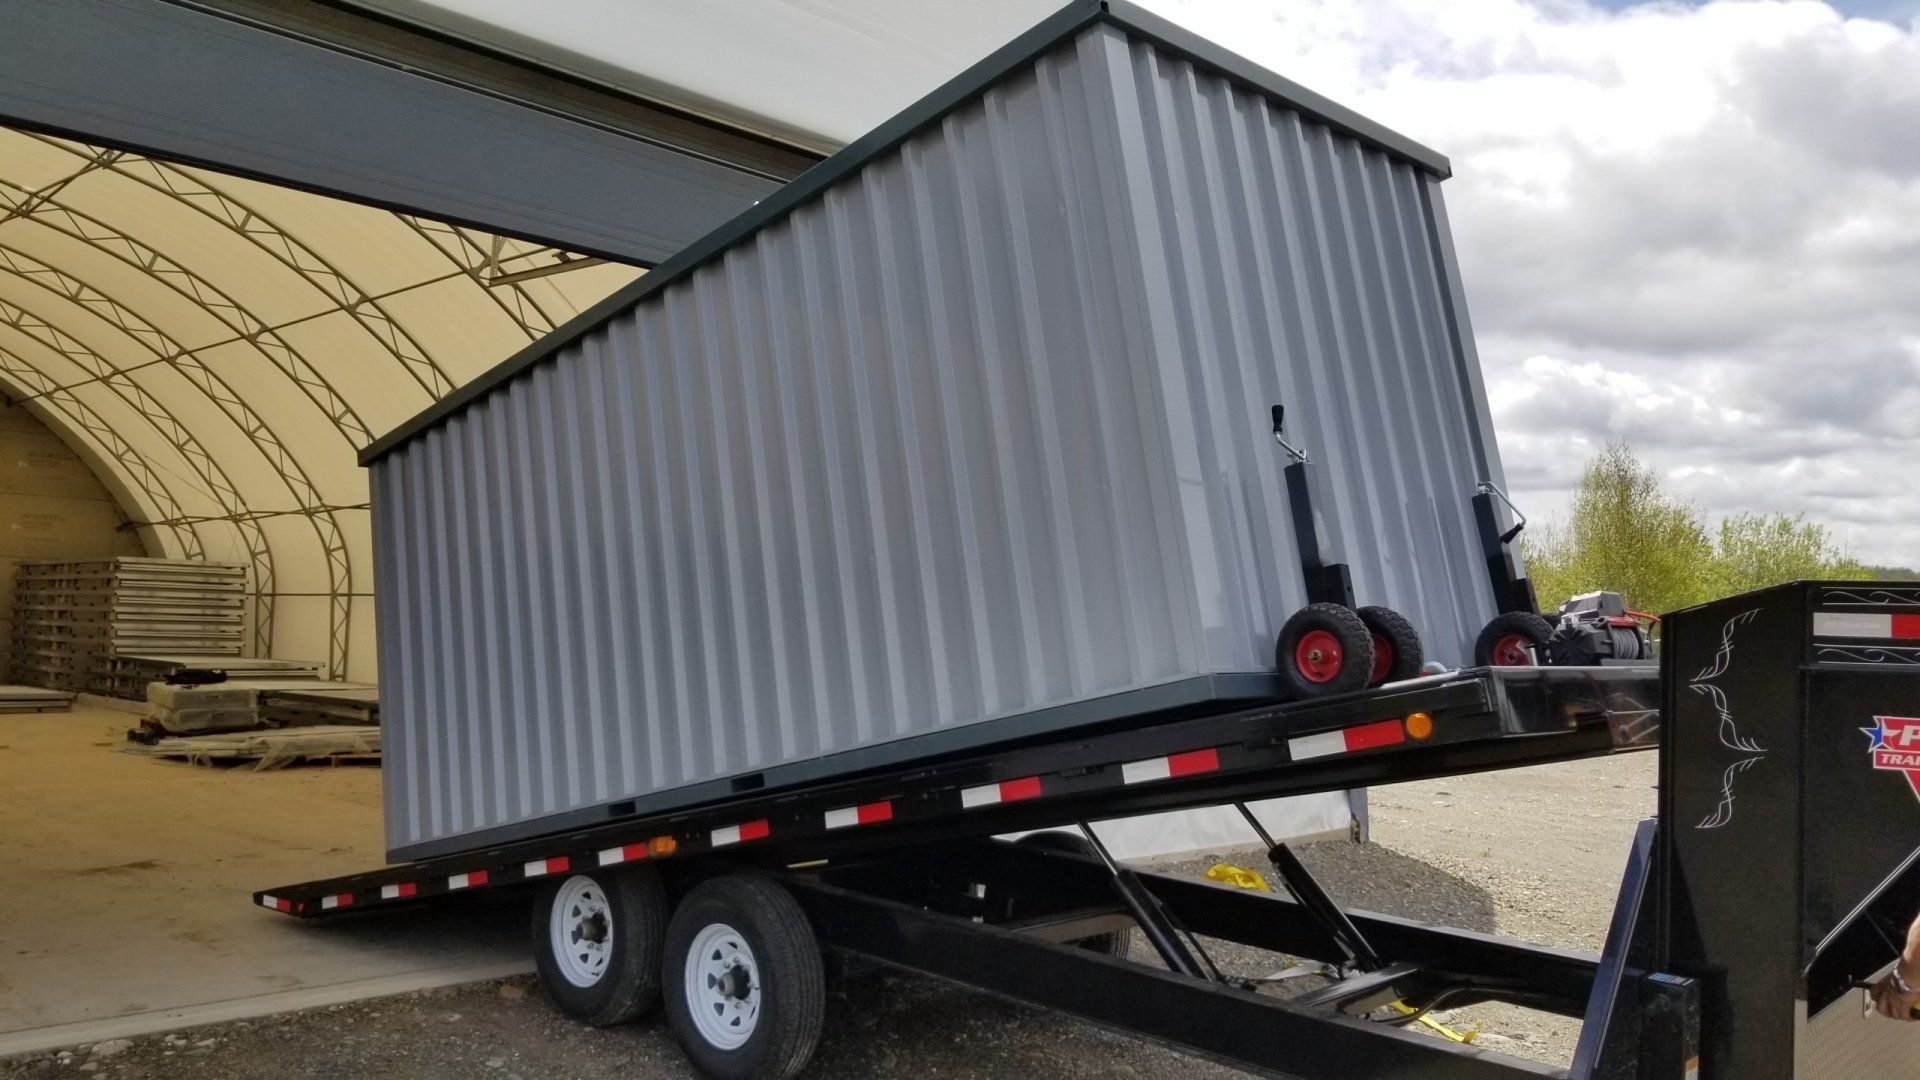 Cover-Tech portable storage containers can be loaded to trailers